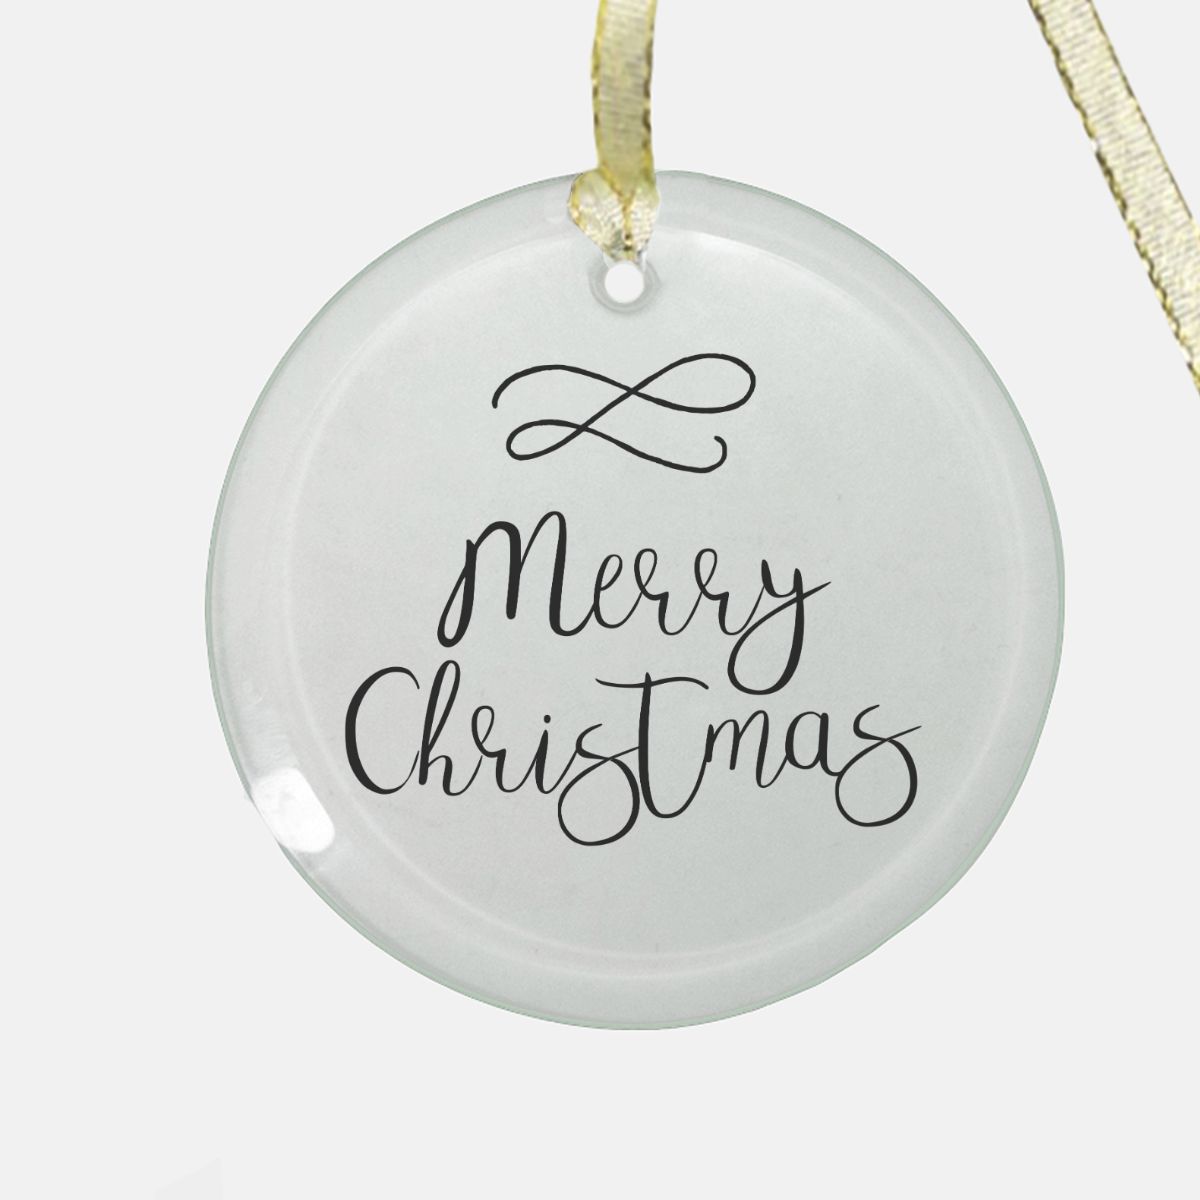 Round Clear Glass Holiday Ornament - Merry Christmas